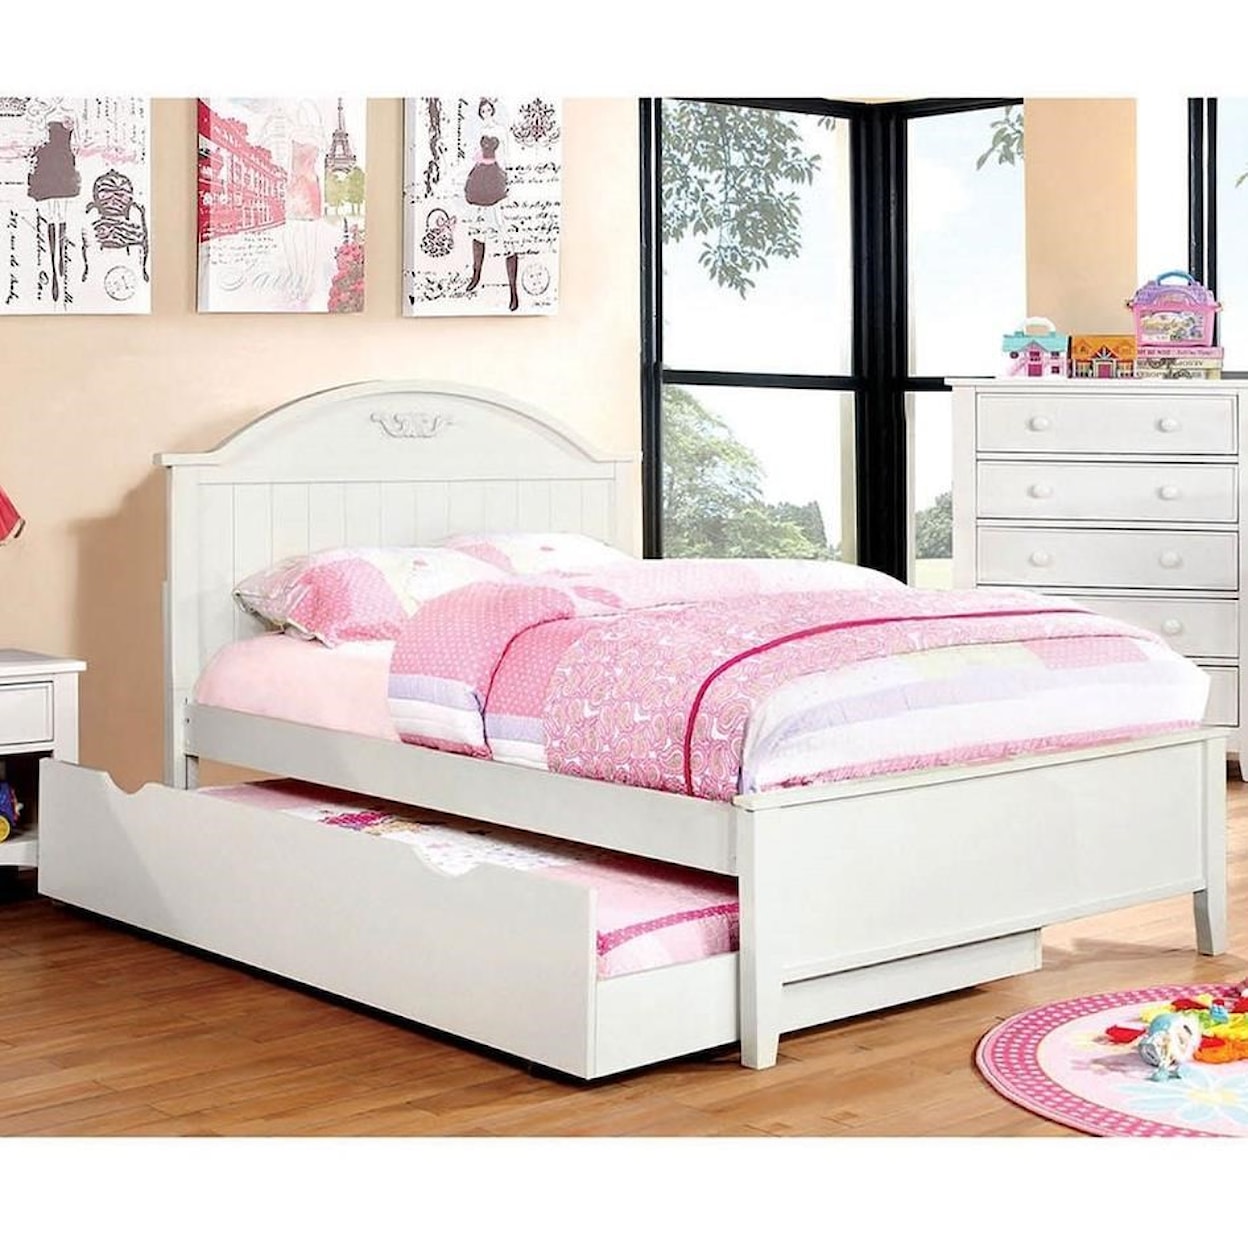 Furniture of America Medina Full Bed with Trundle